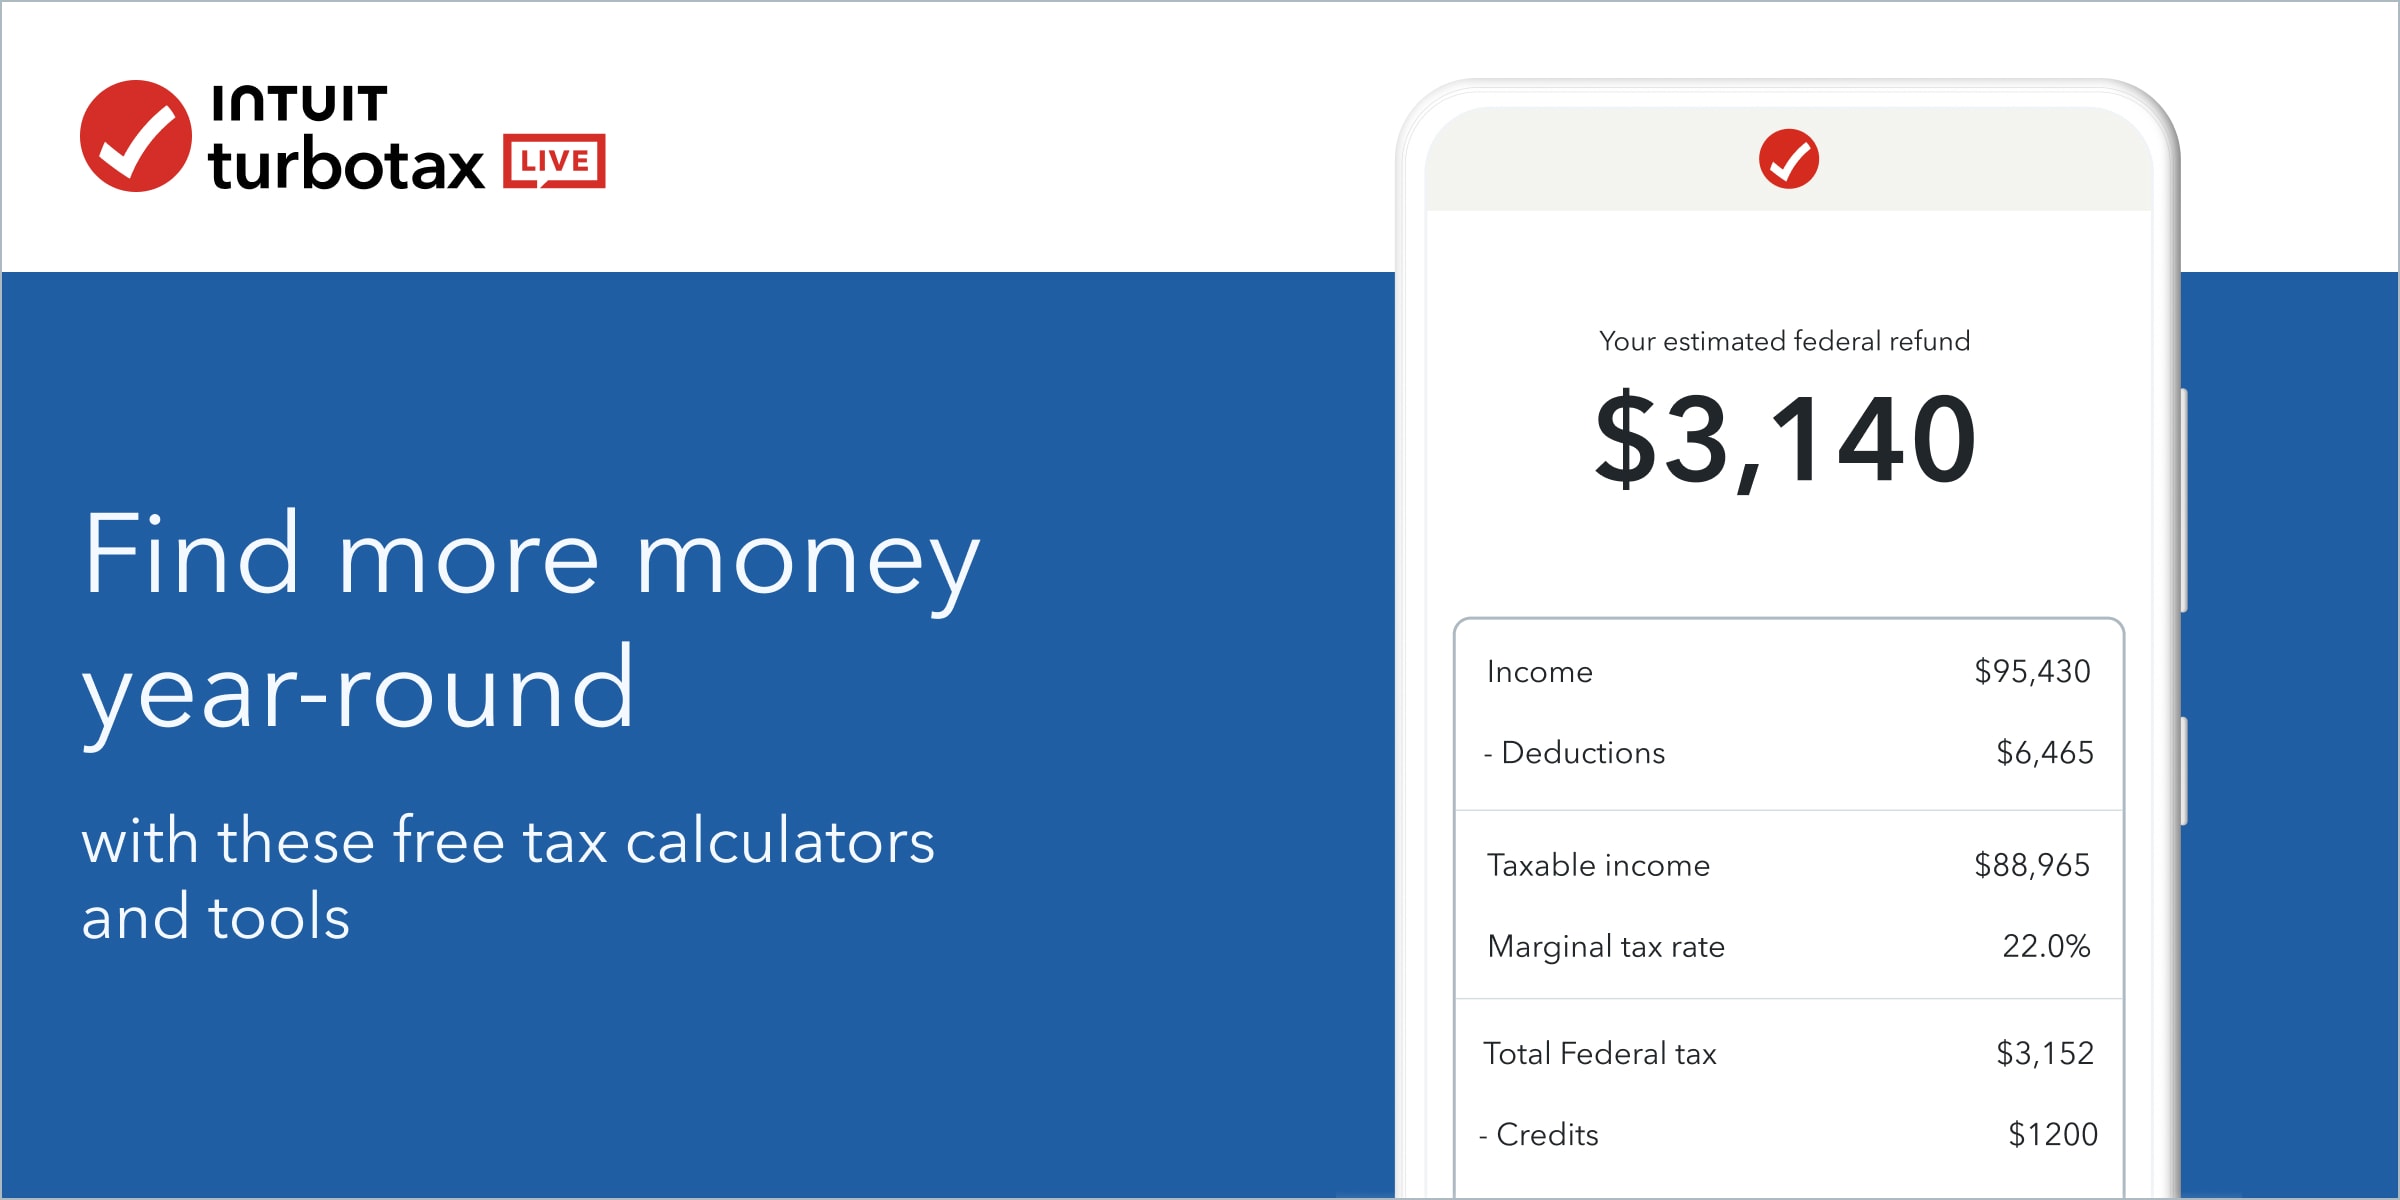 The 5 Best  Money Calculator Tools Available Right Now - ViewsReviews